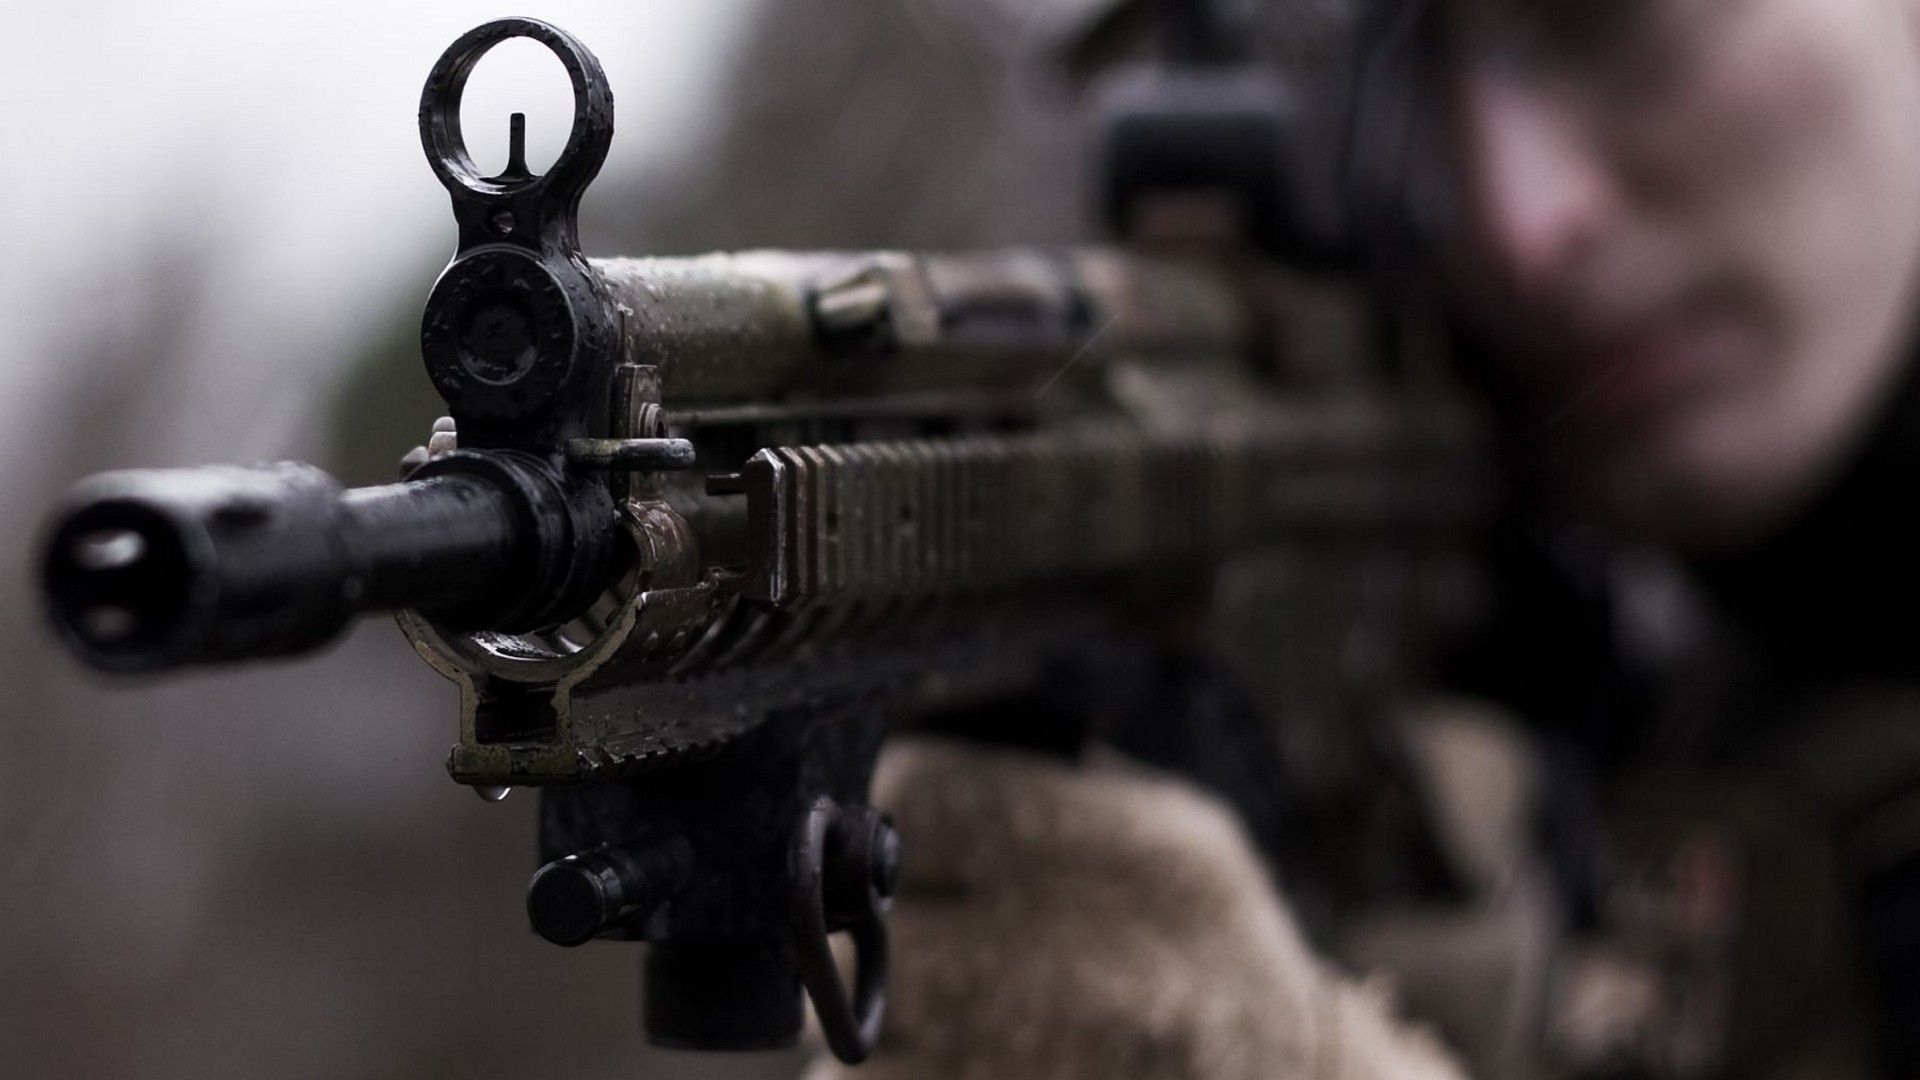 General 1920x1080 SIG SG 550 weapon military soldier closeup Swiss firearms